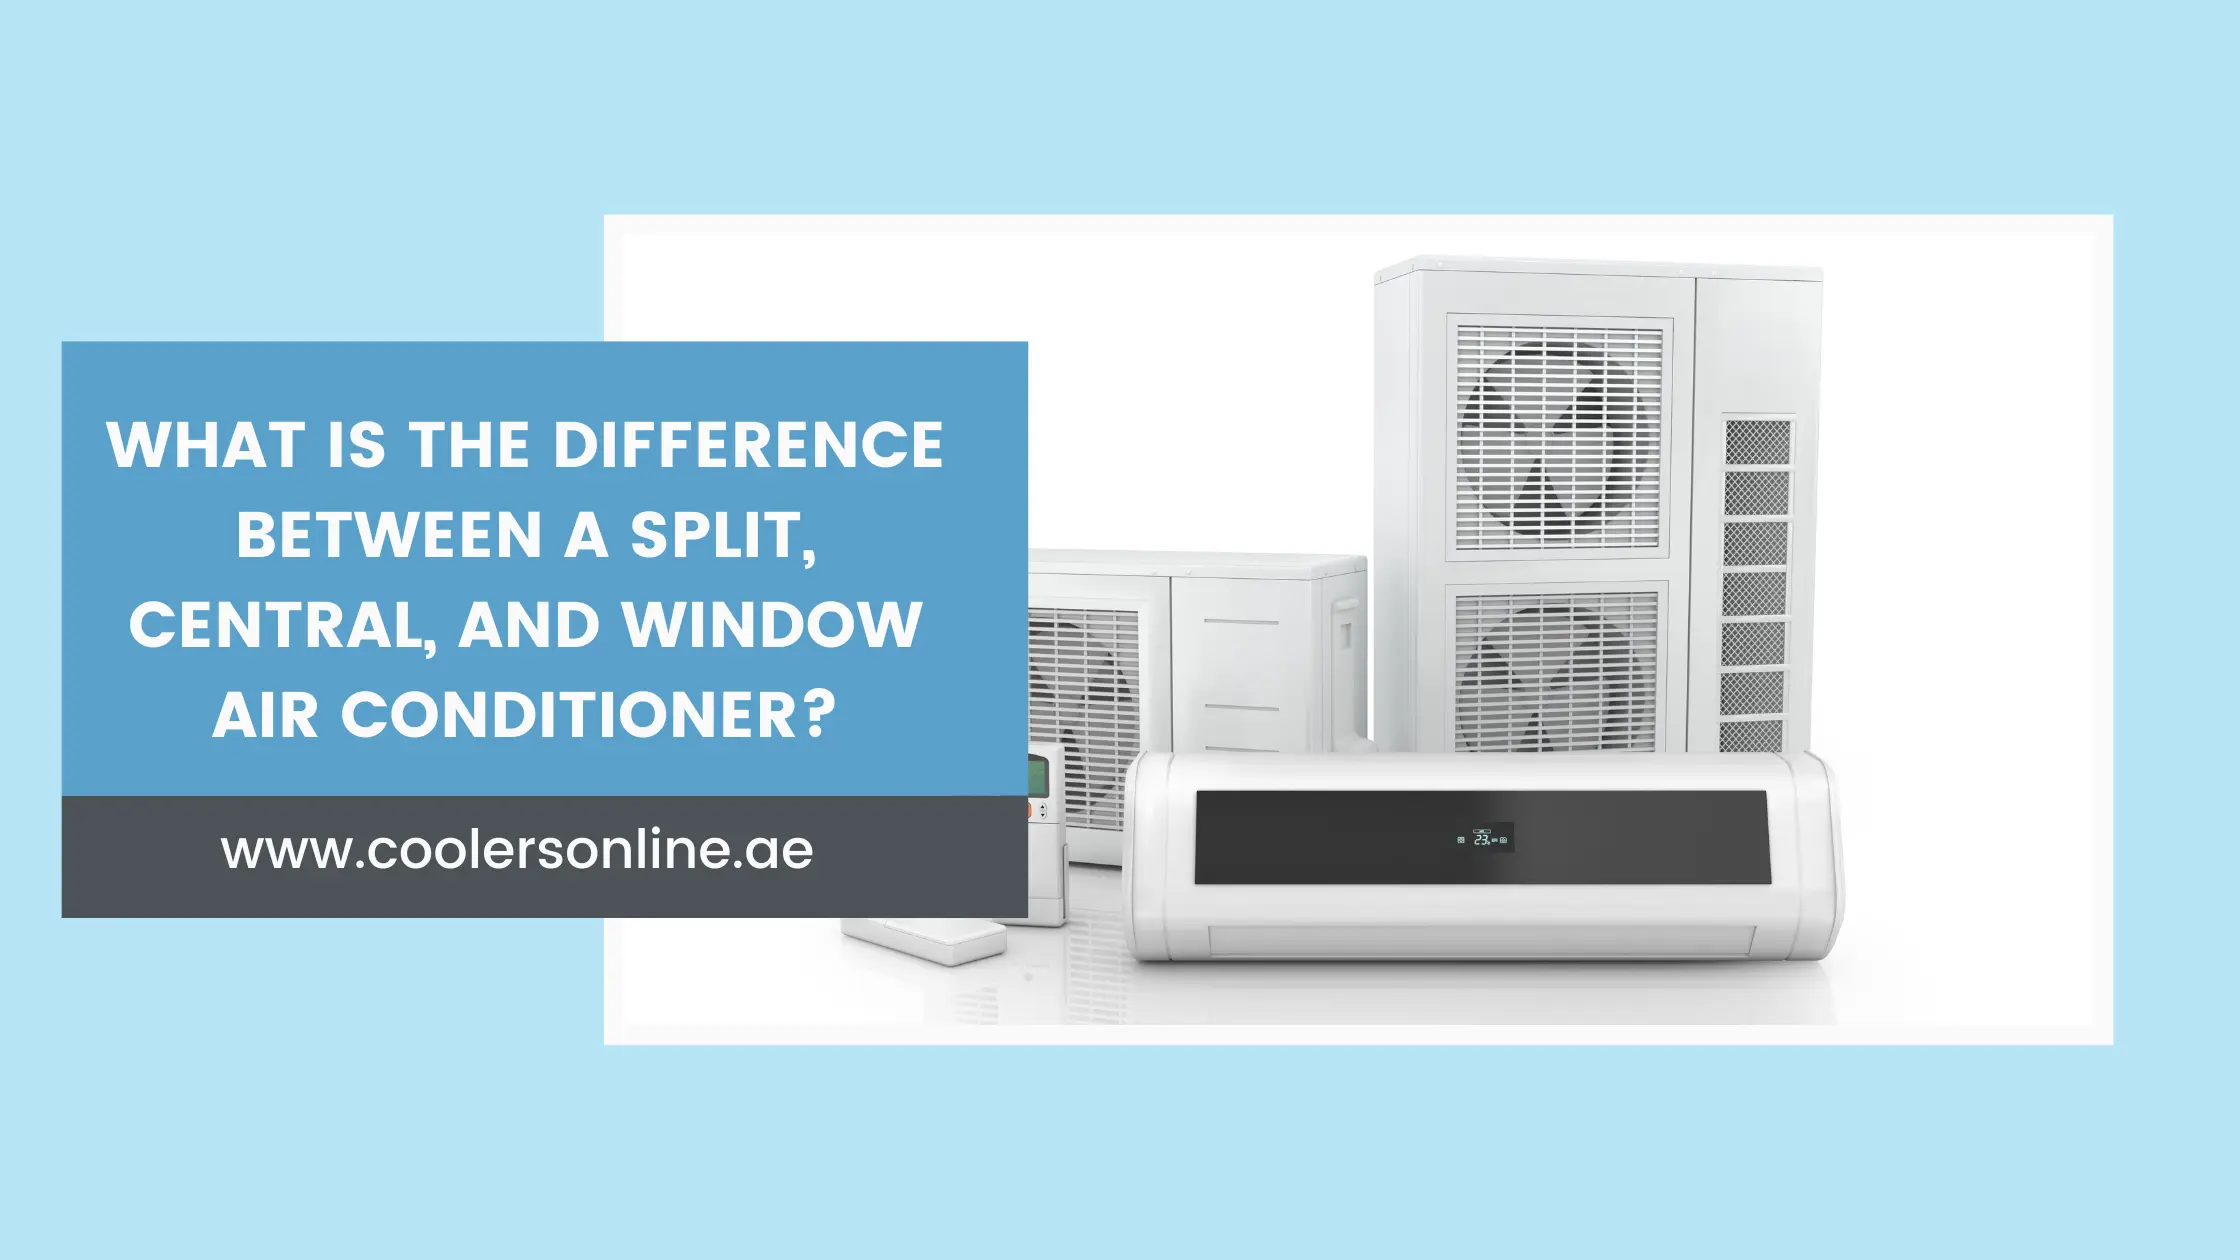 What Is the Difference Between a Split Air Conditioner, Central Air Conditioner, and Window Air Conditioner?